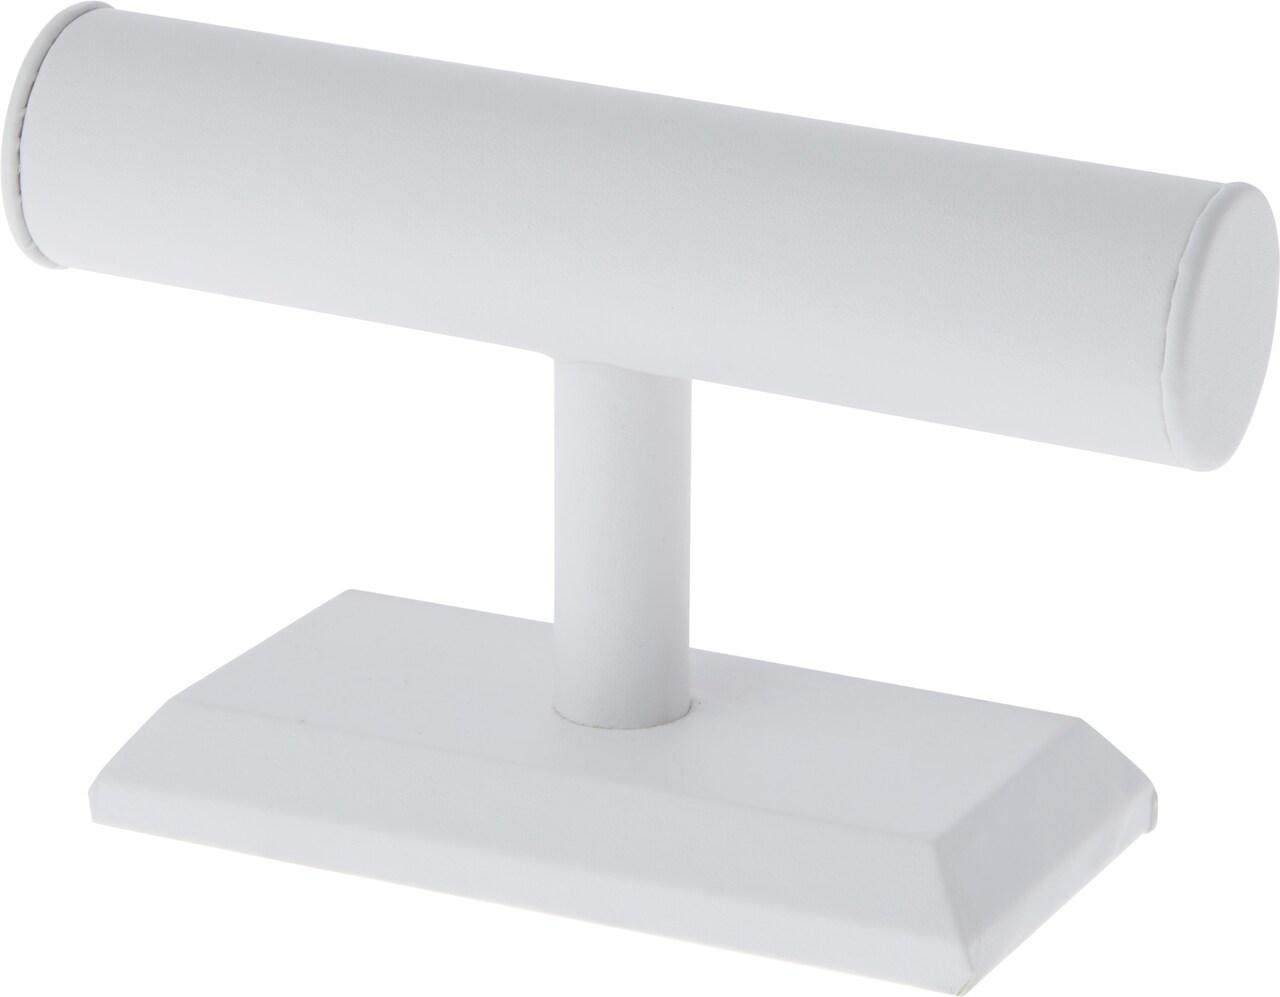 Plymor White Faux Leather T-Bar Bracelet Display Stand, 7.5 W x 5